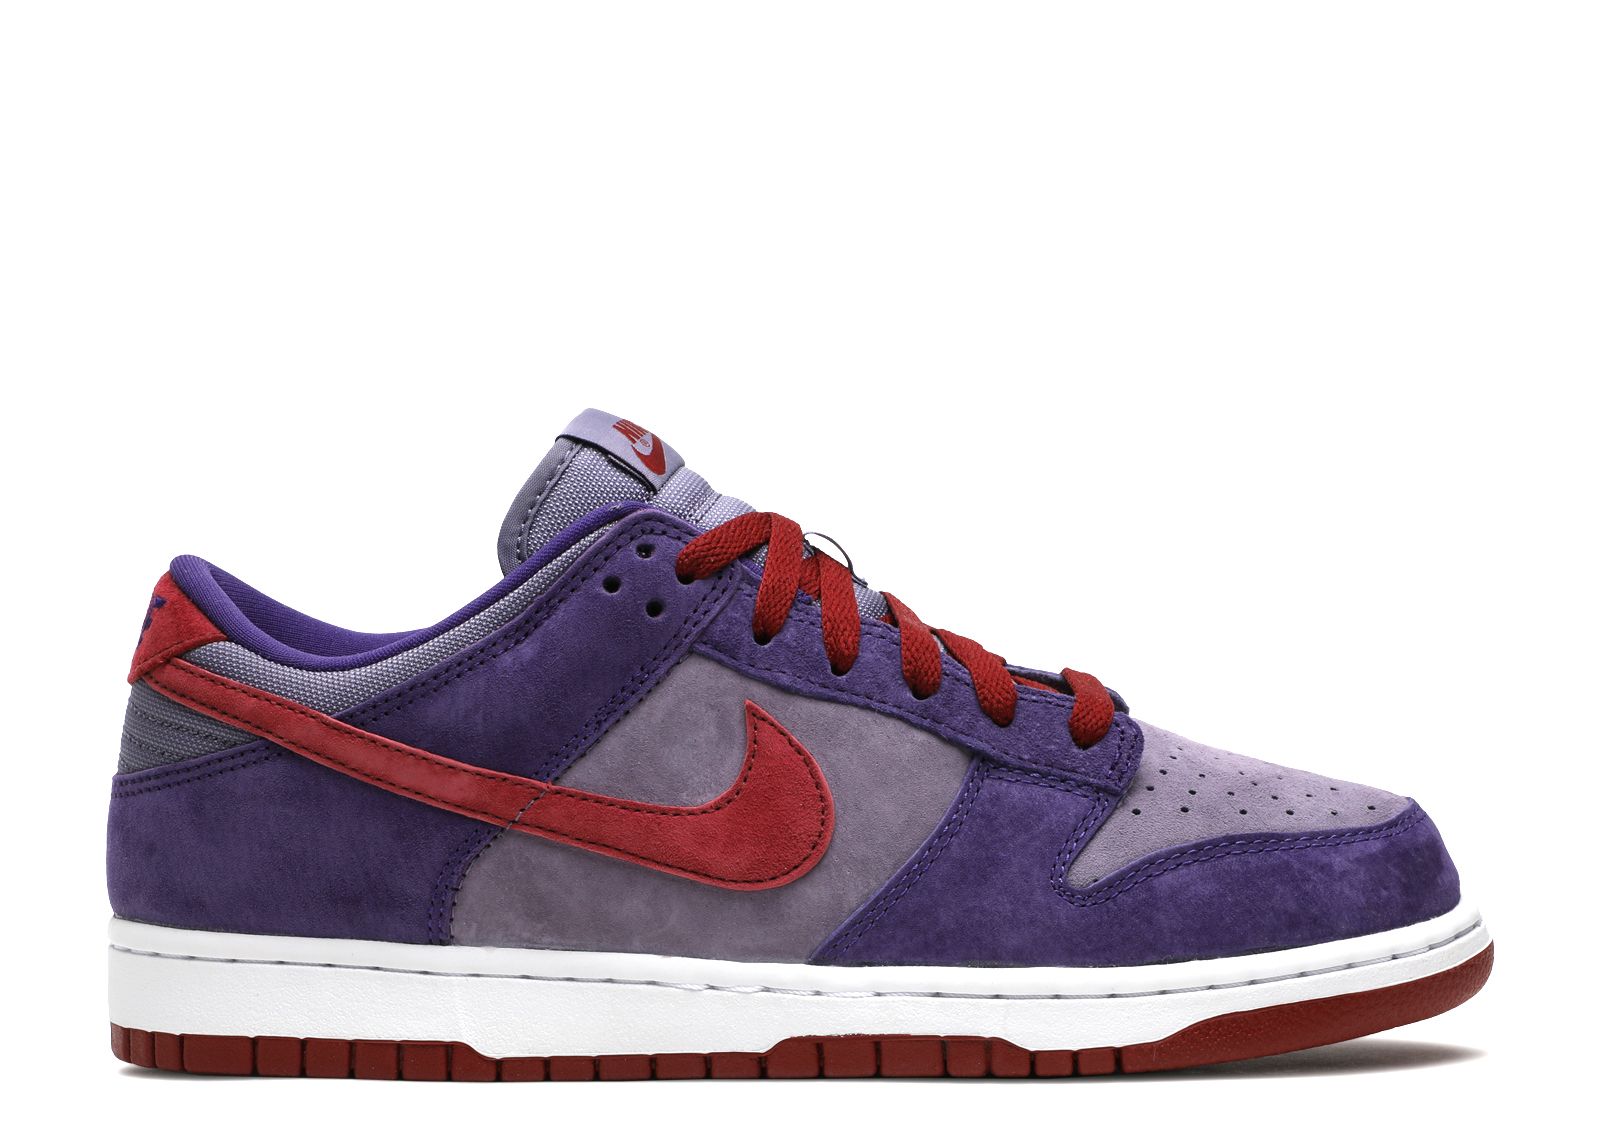 Nike SB Dunk Low Mystic Red - DV5429-601 Raffles and Release Date